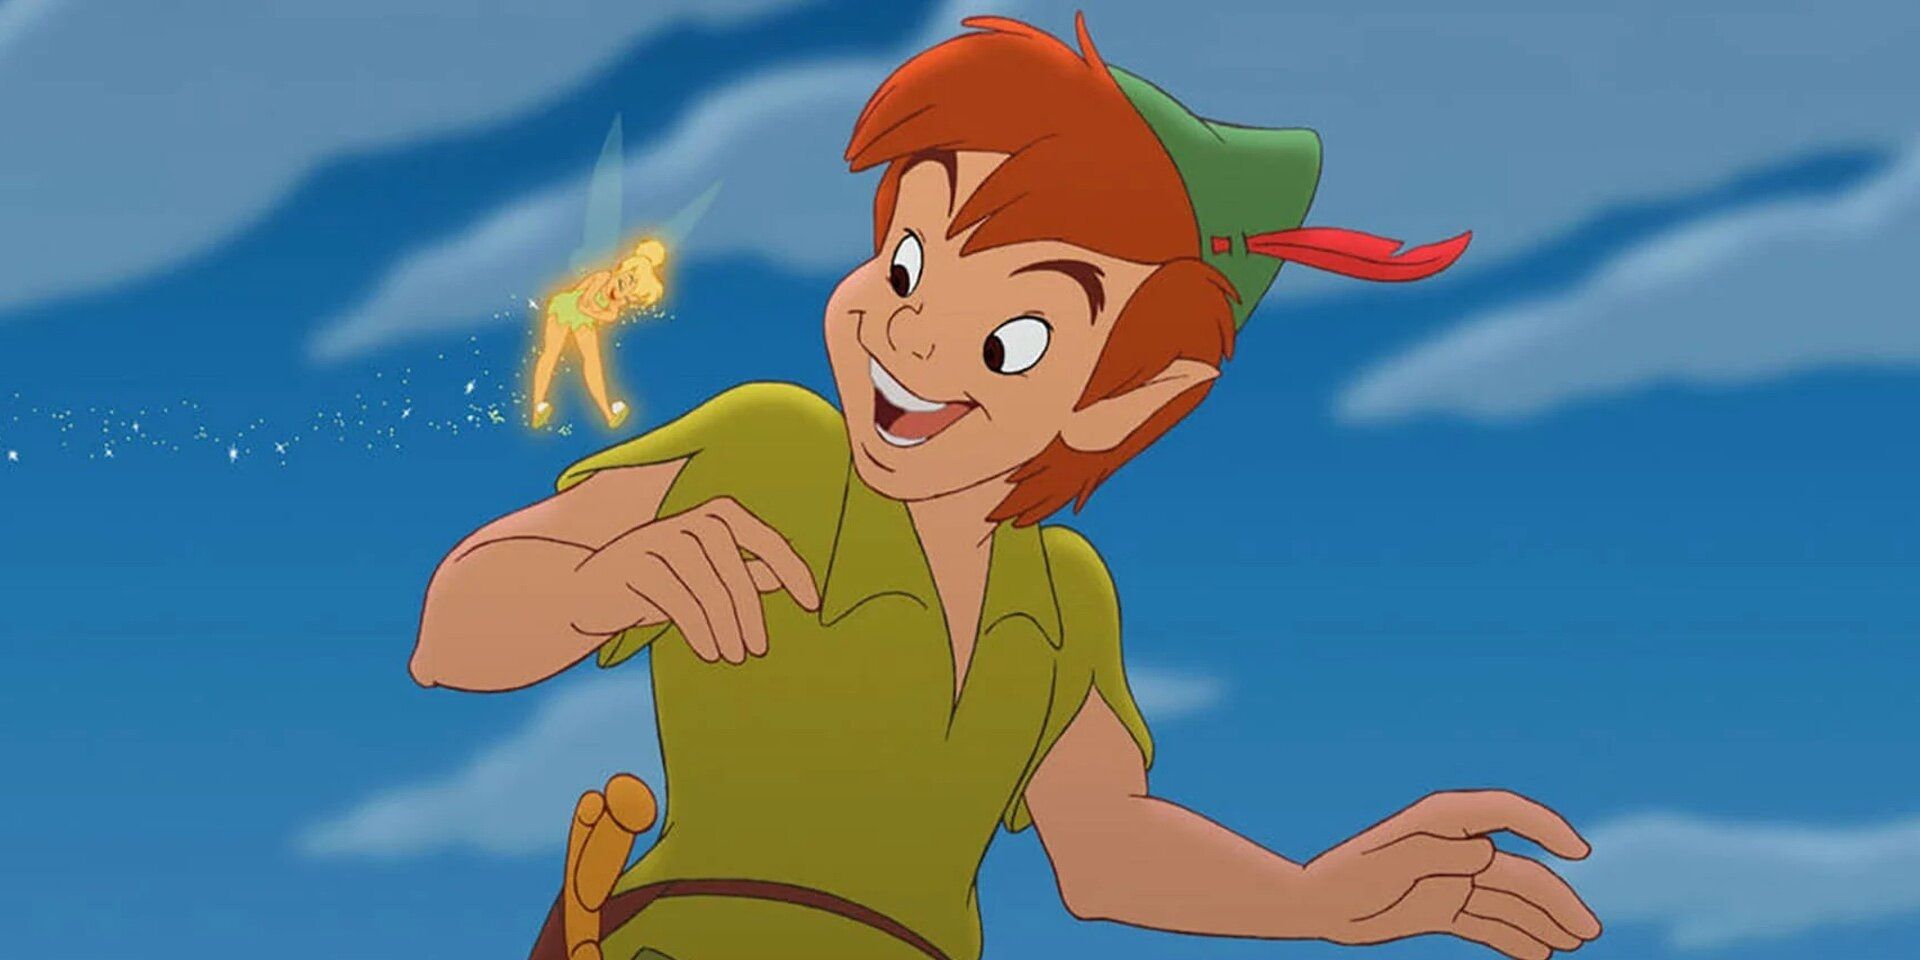 Disney's Peter Pan and TInkerbell with a blue sky background.